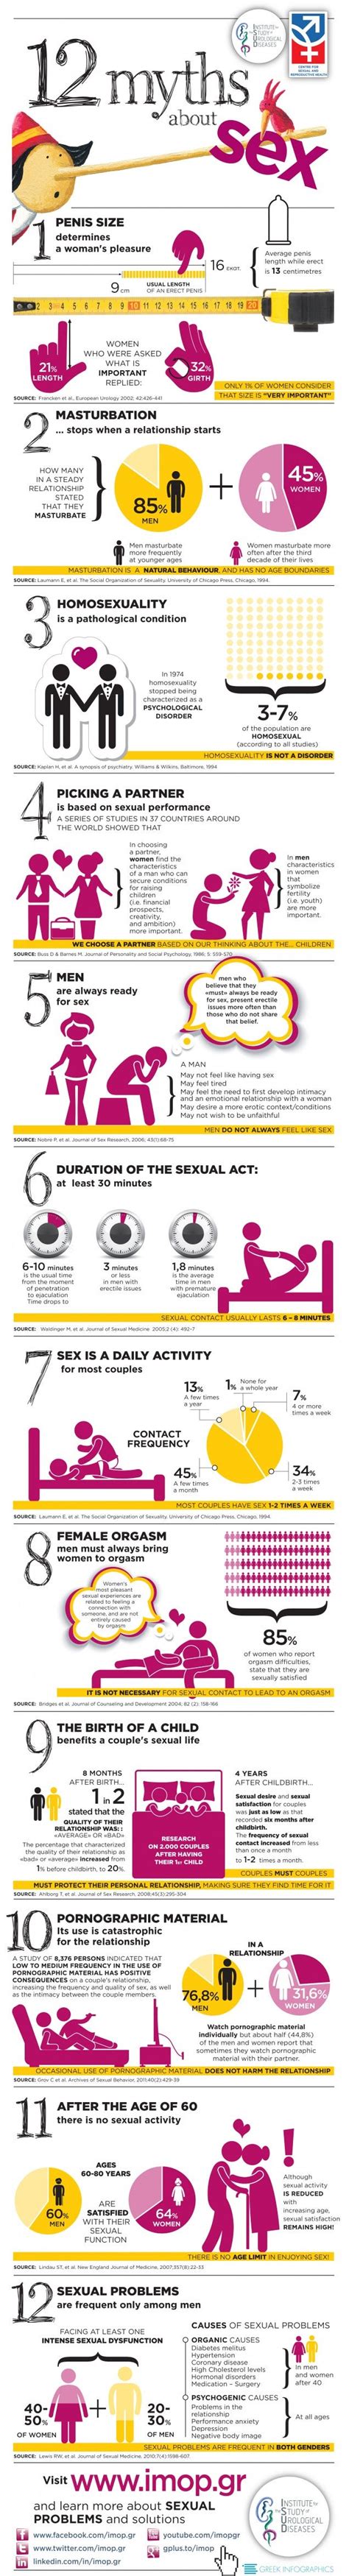 12 myths about sex you need to stop believing [infographic] lifehacker australia